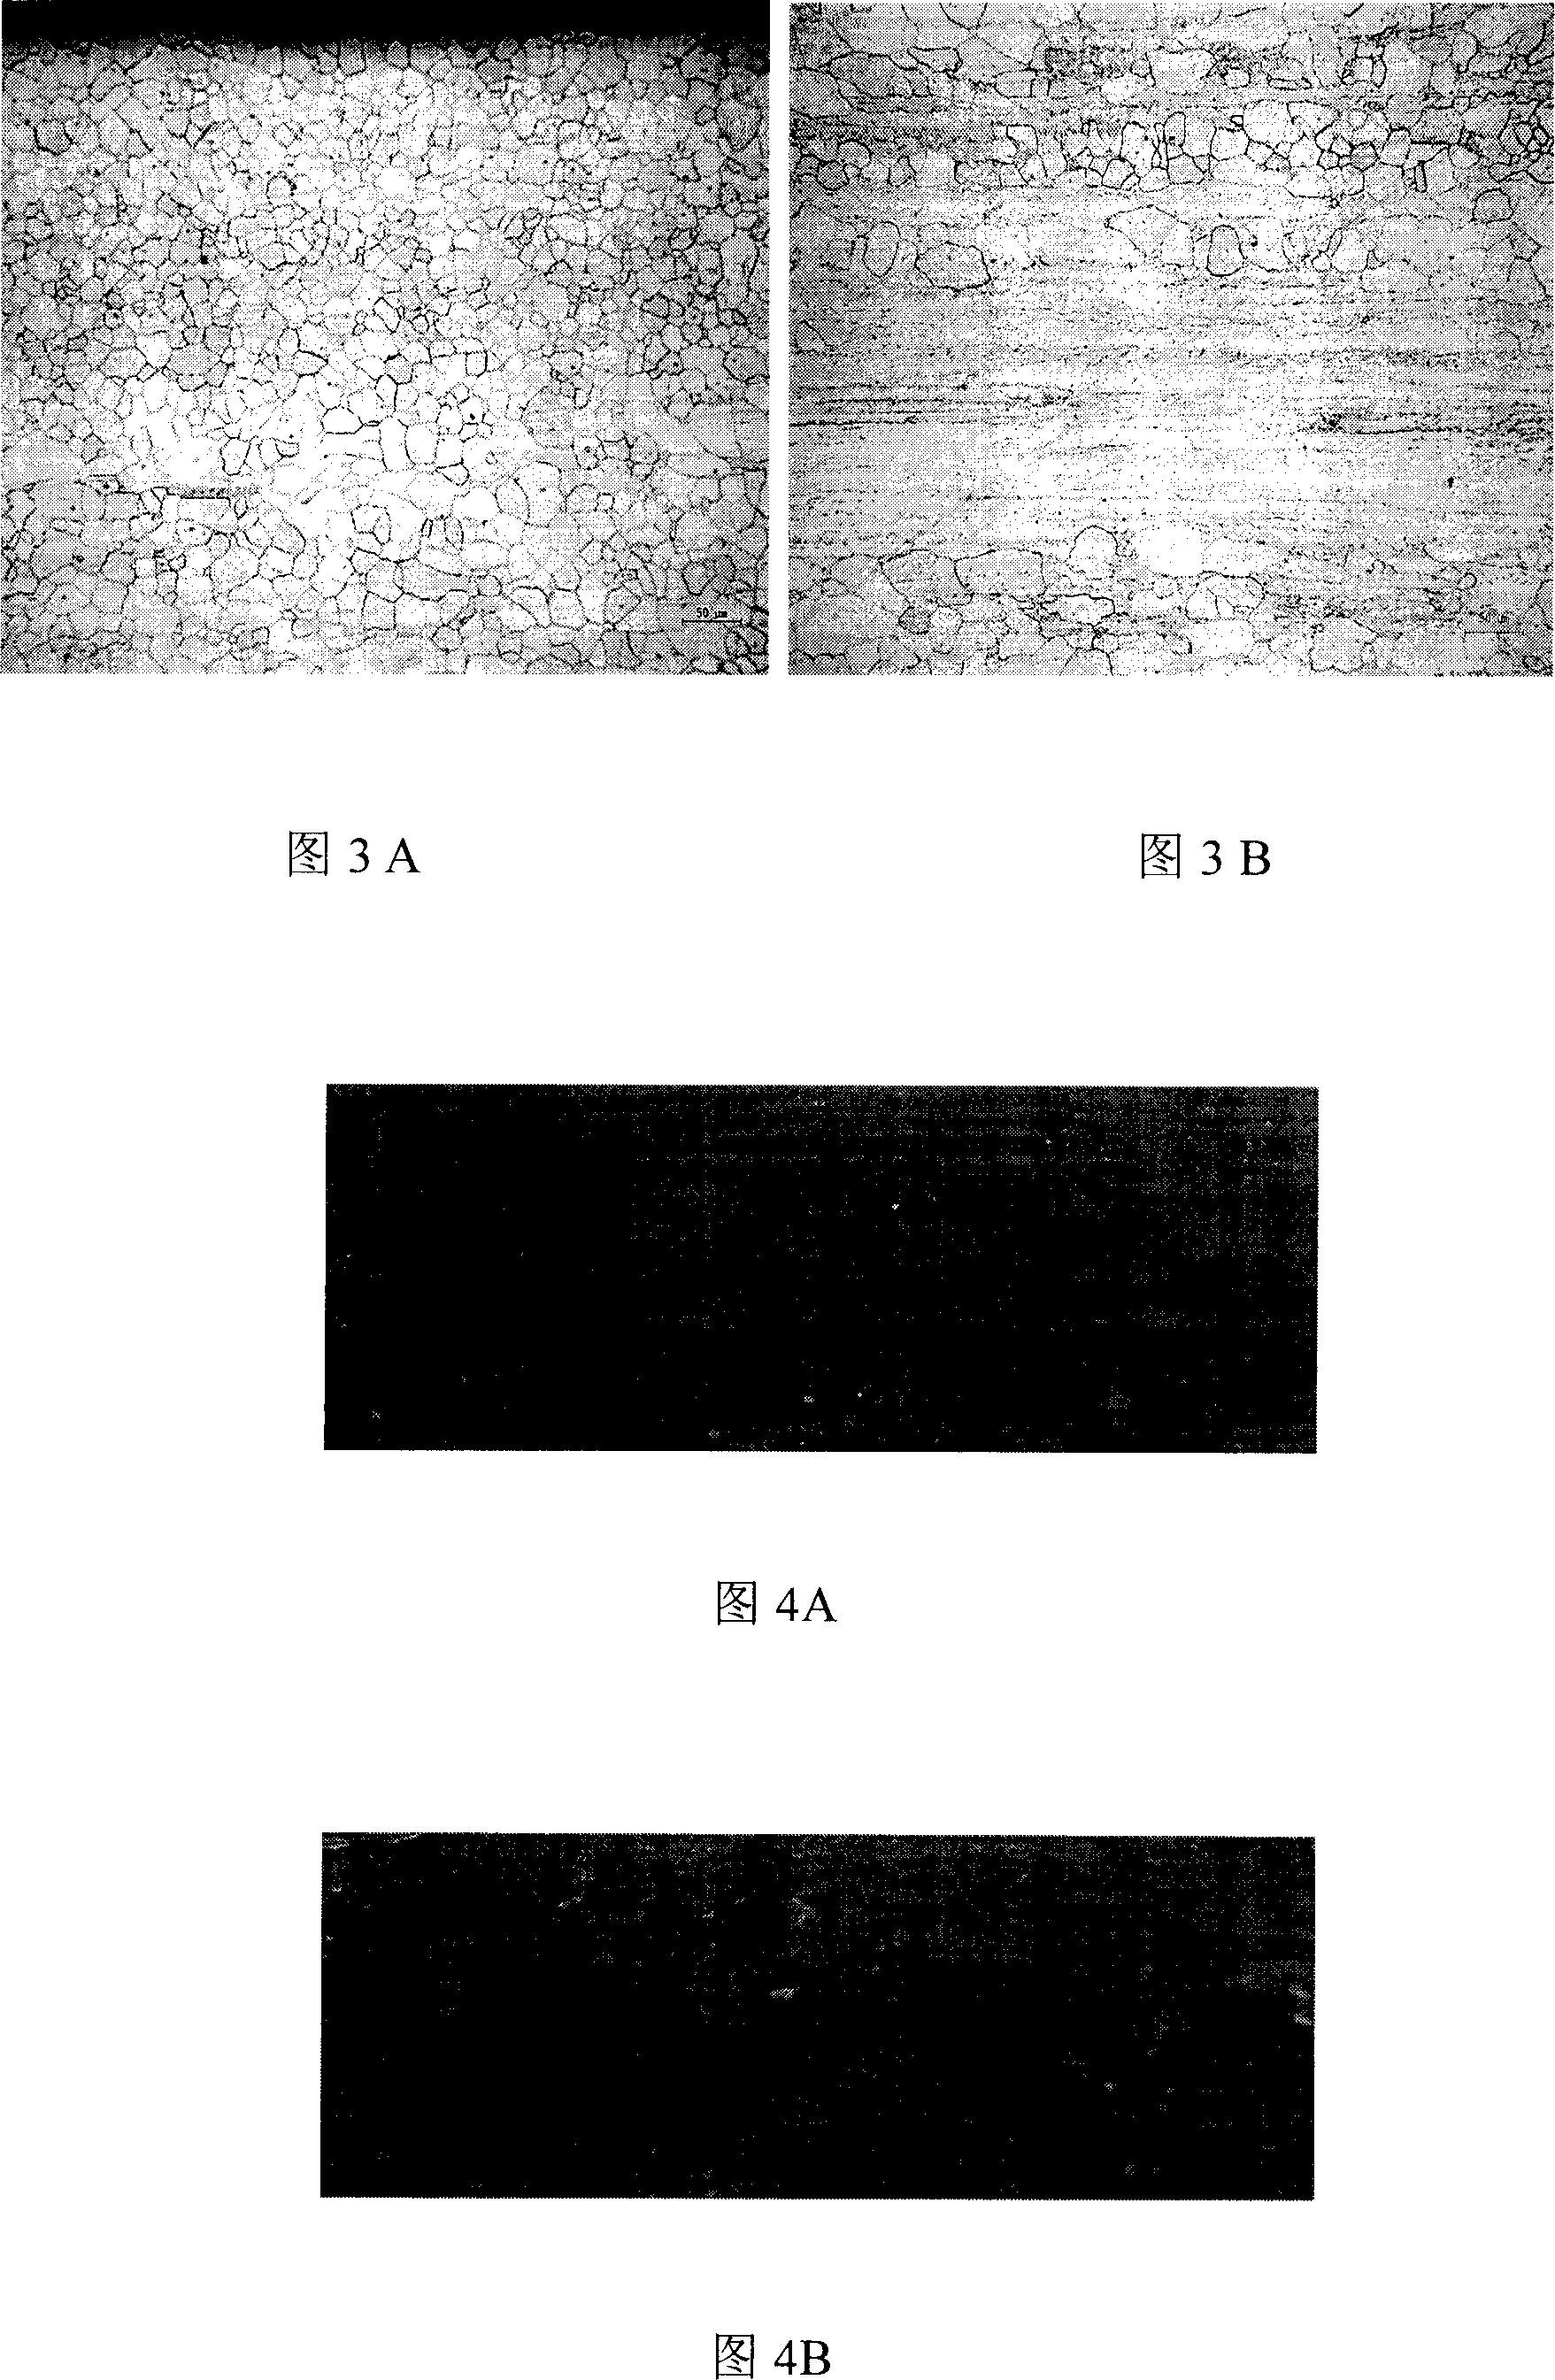 Process for producing ferritic stainless steel